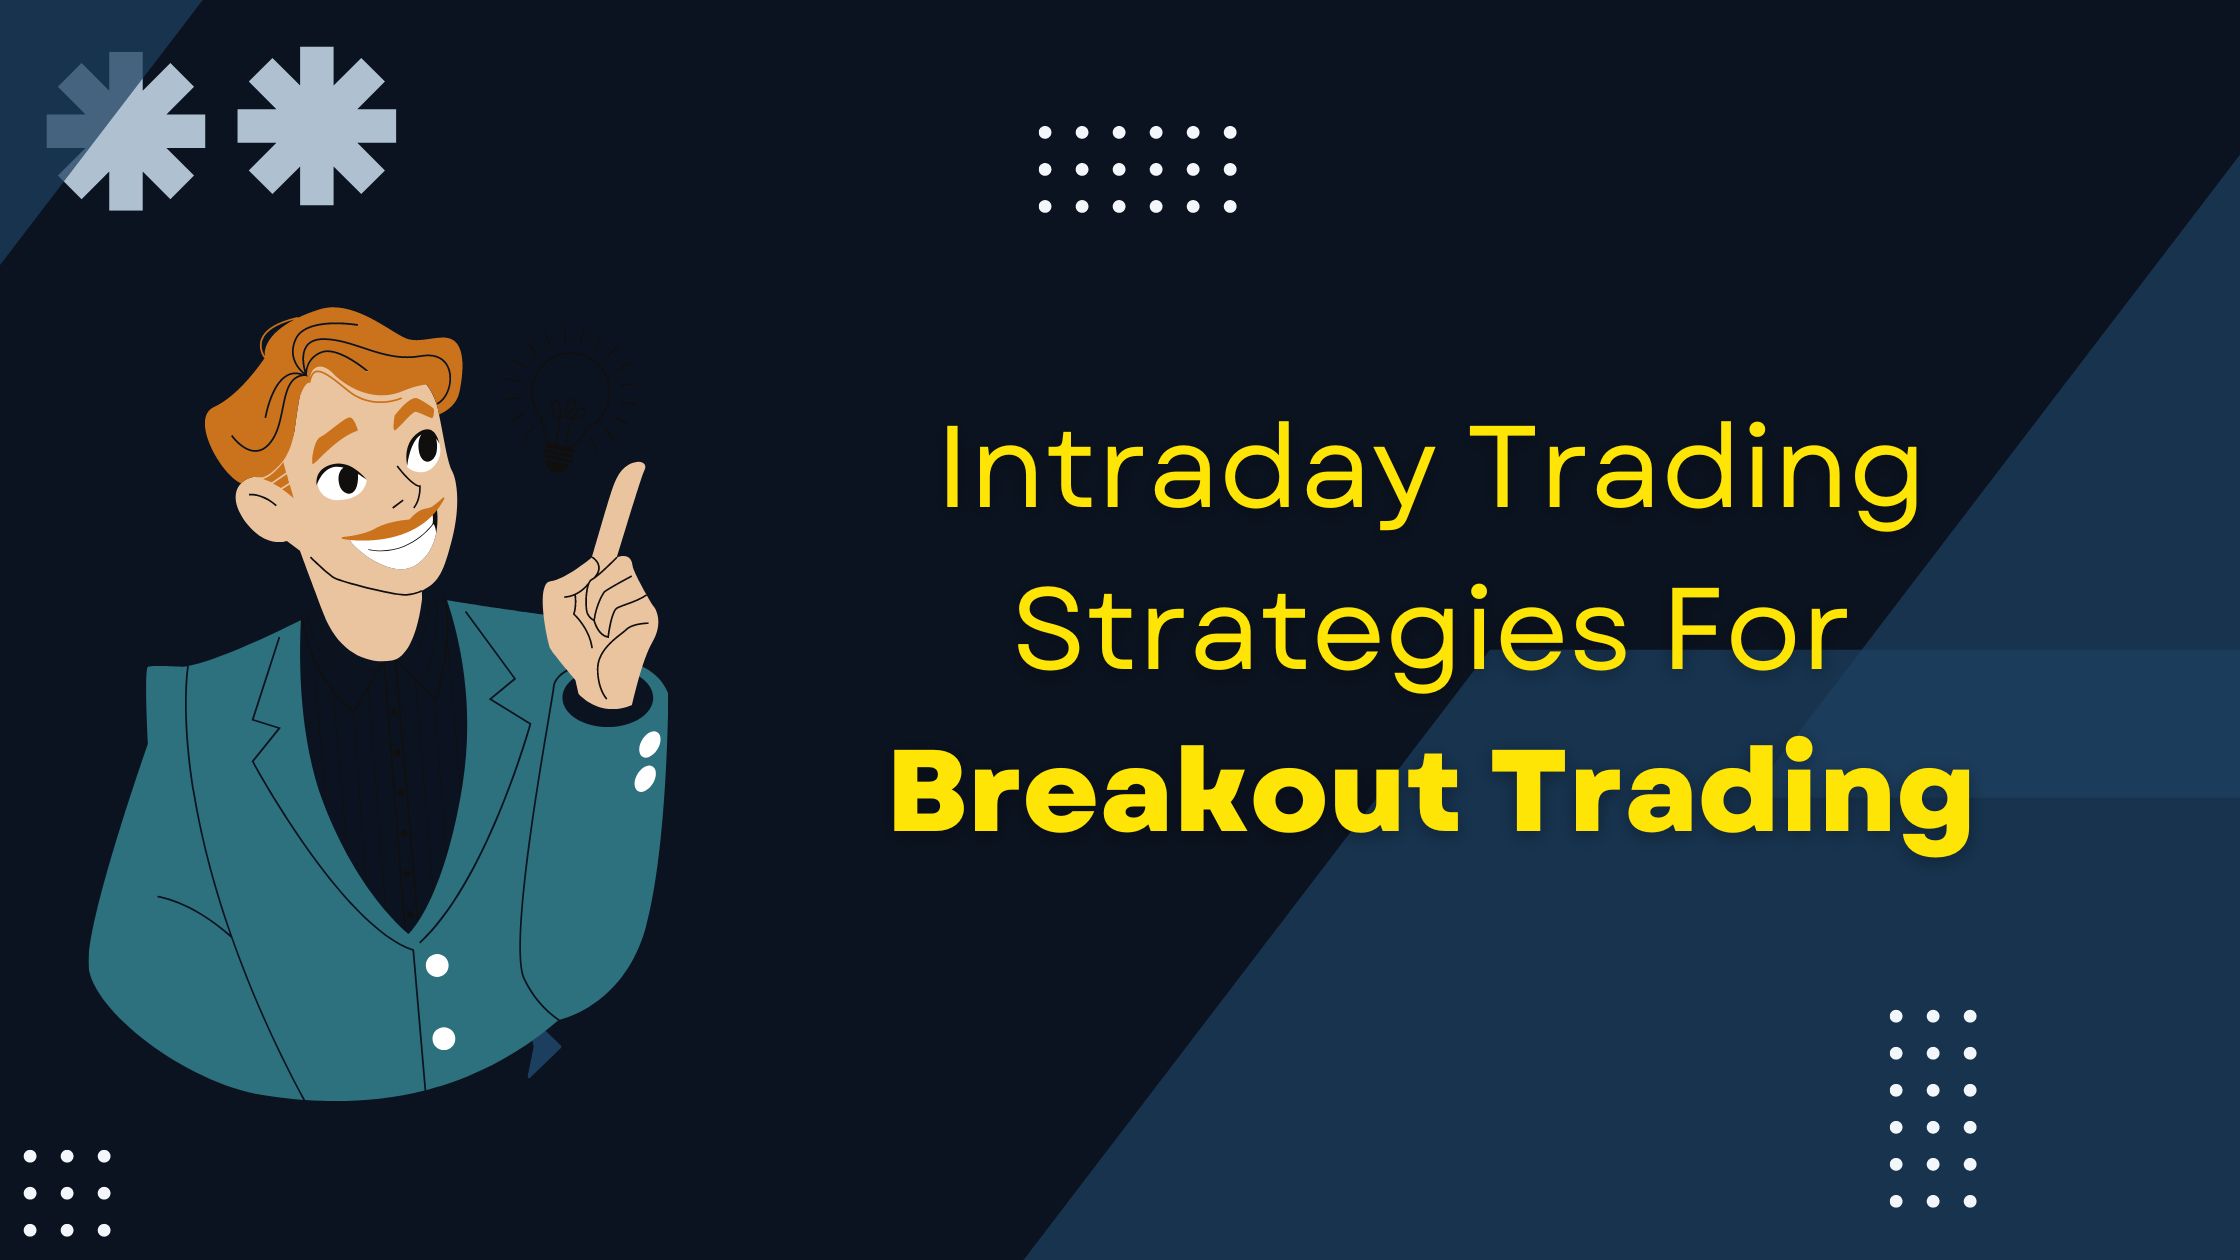 Intraday Trading Strategies: Breakout Trading